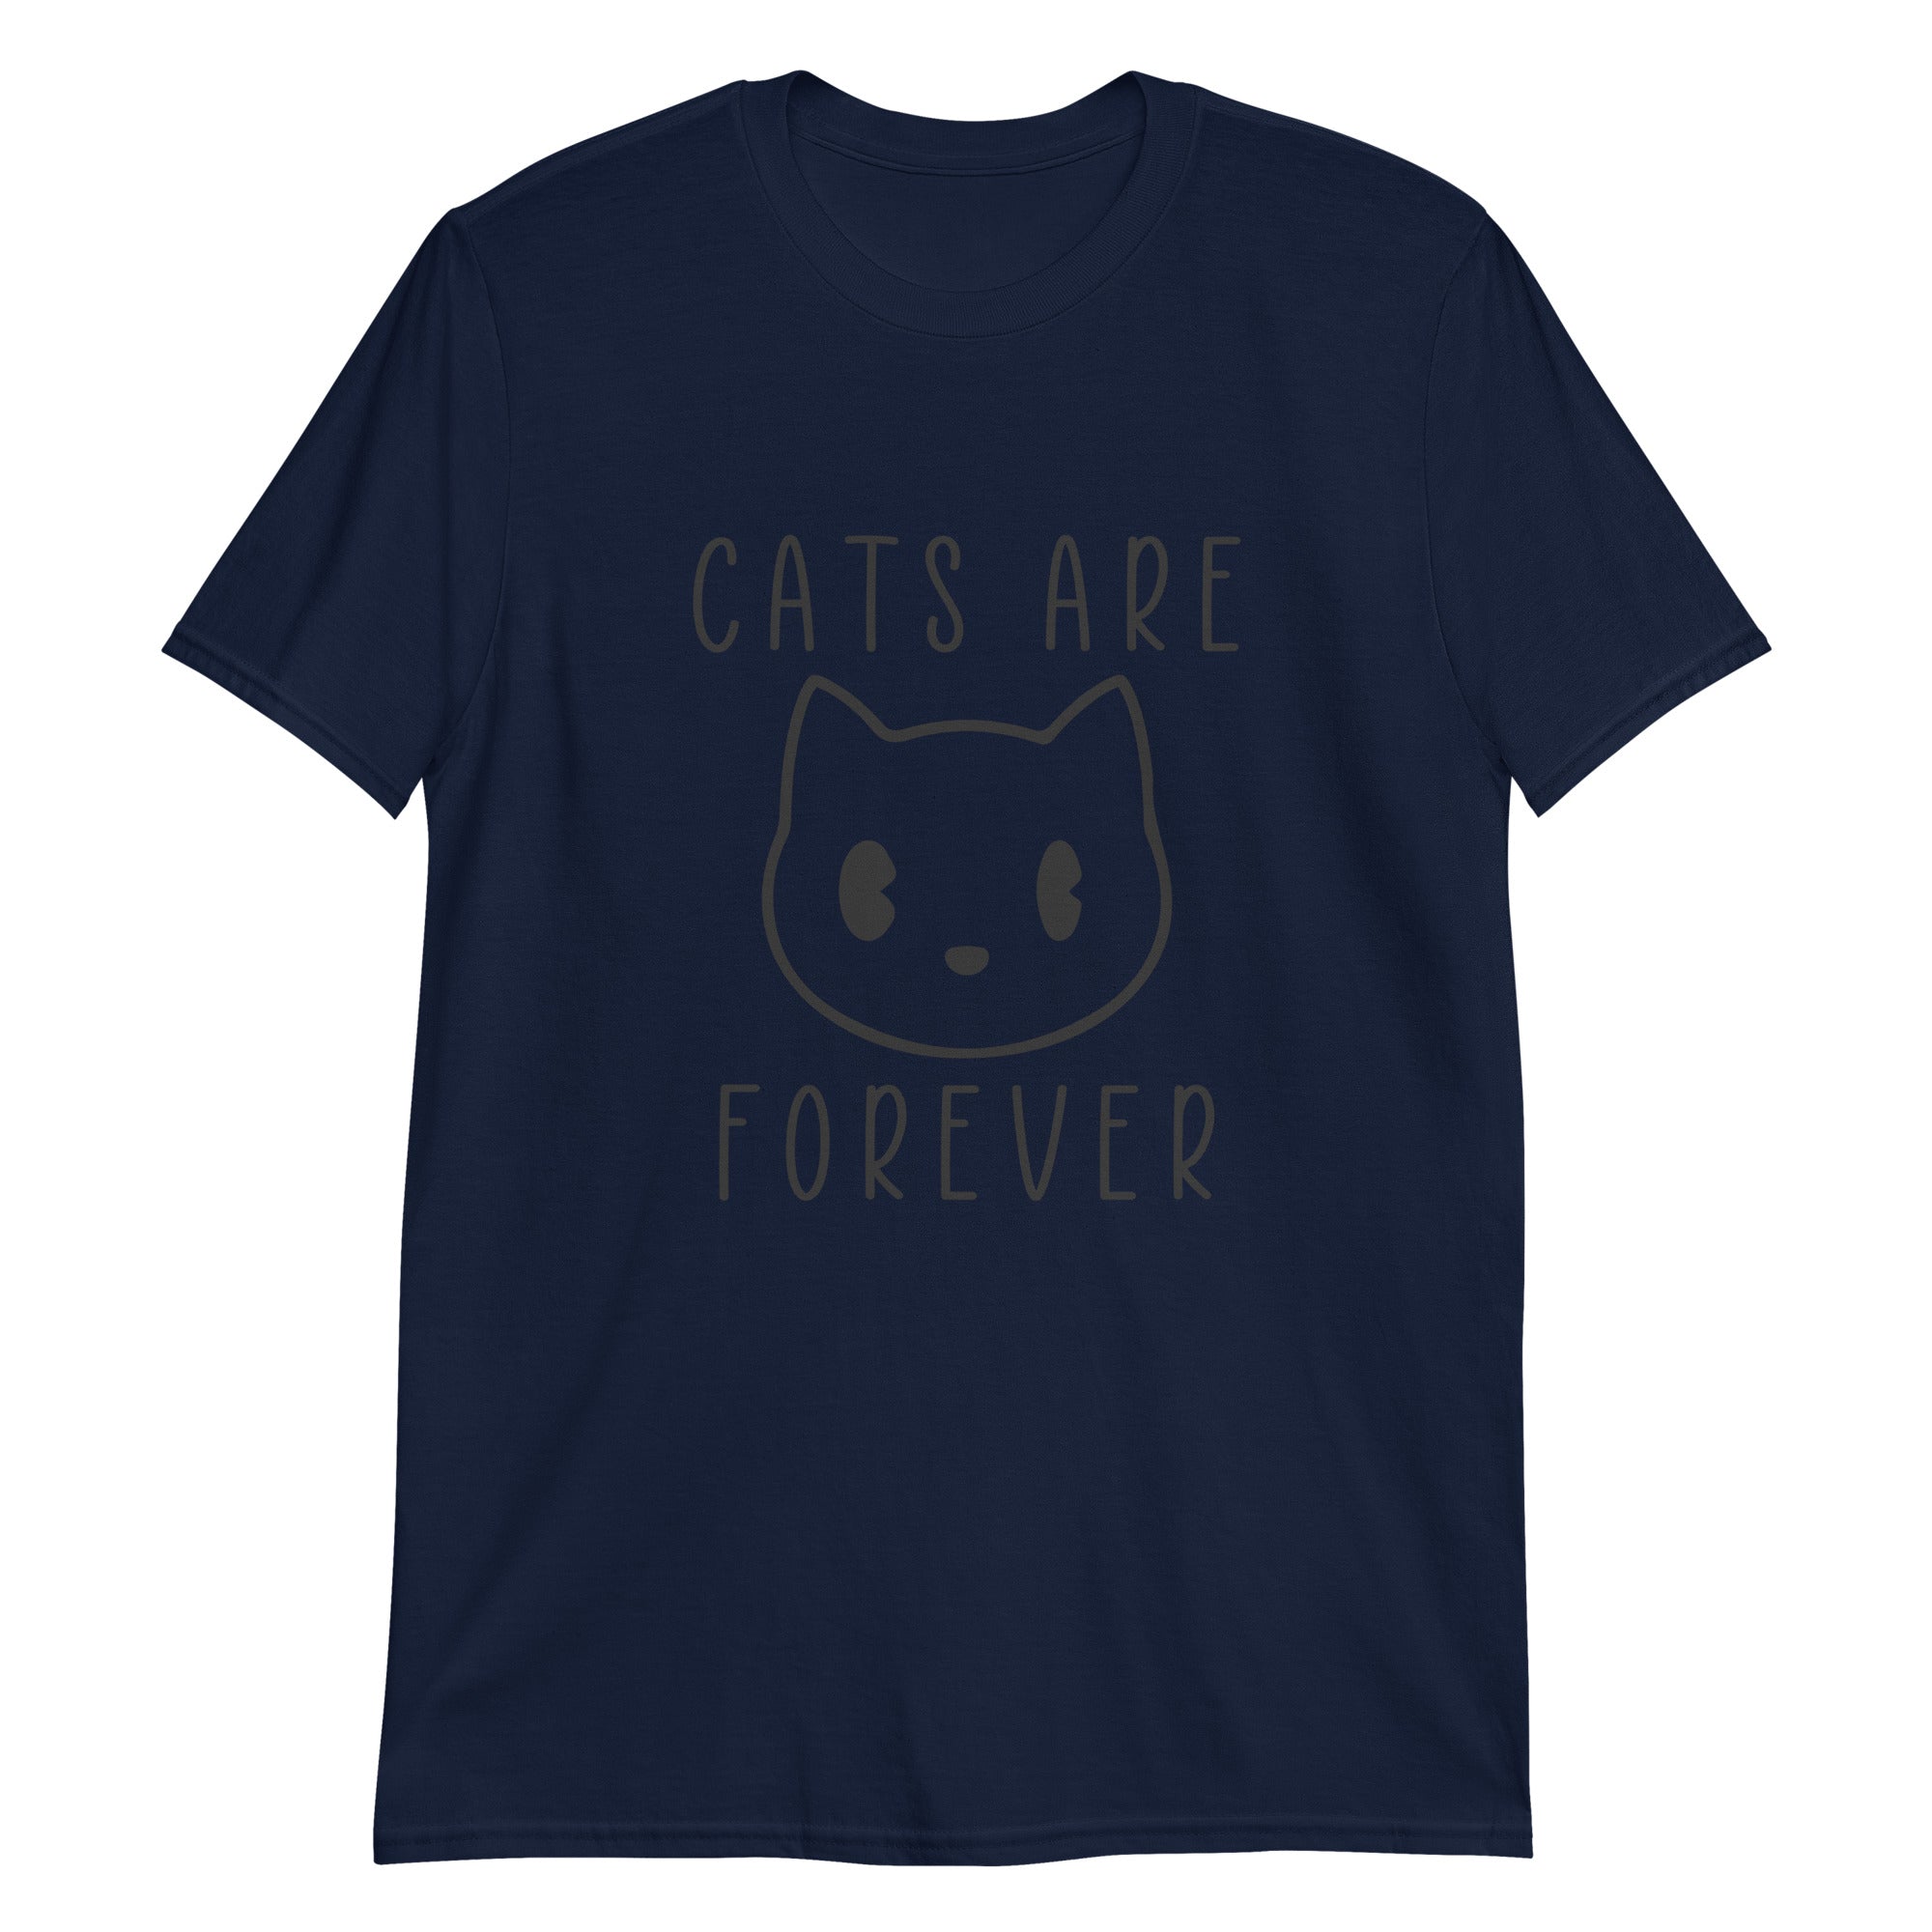 Cats are Forever Short-Sleeve Unisex T-Shirt